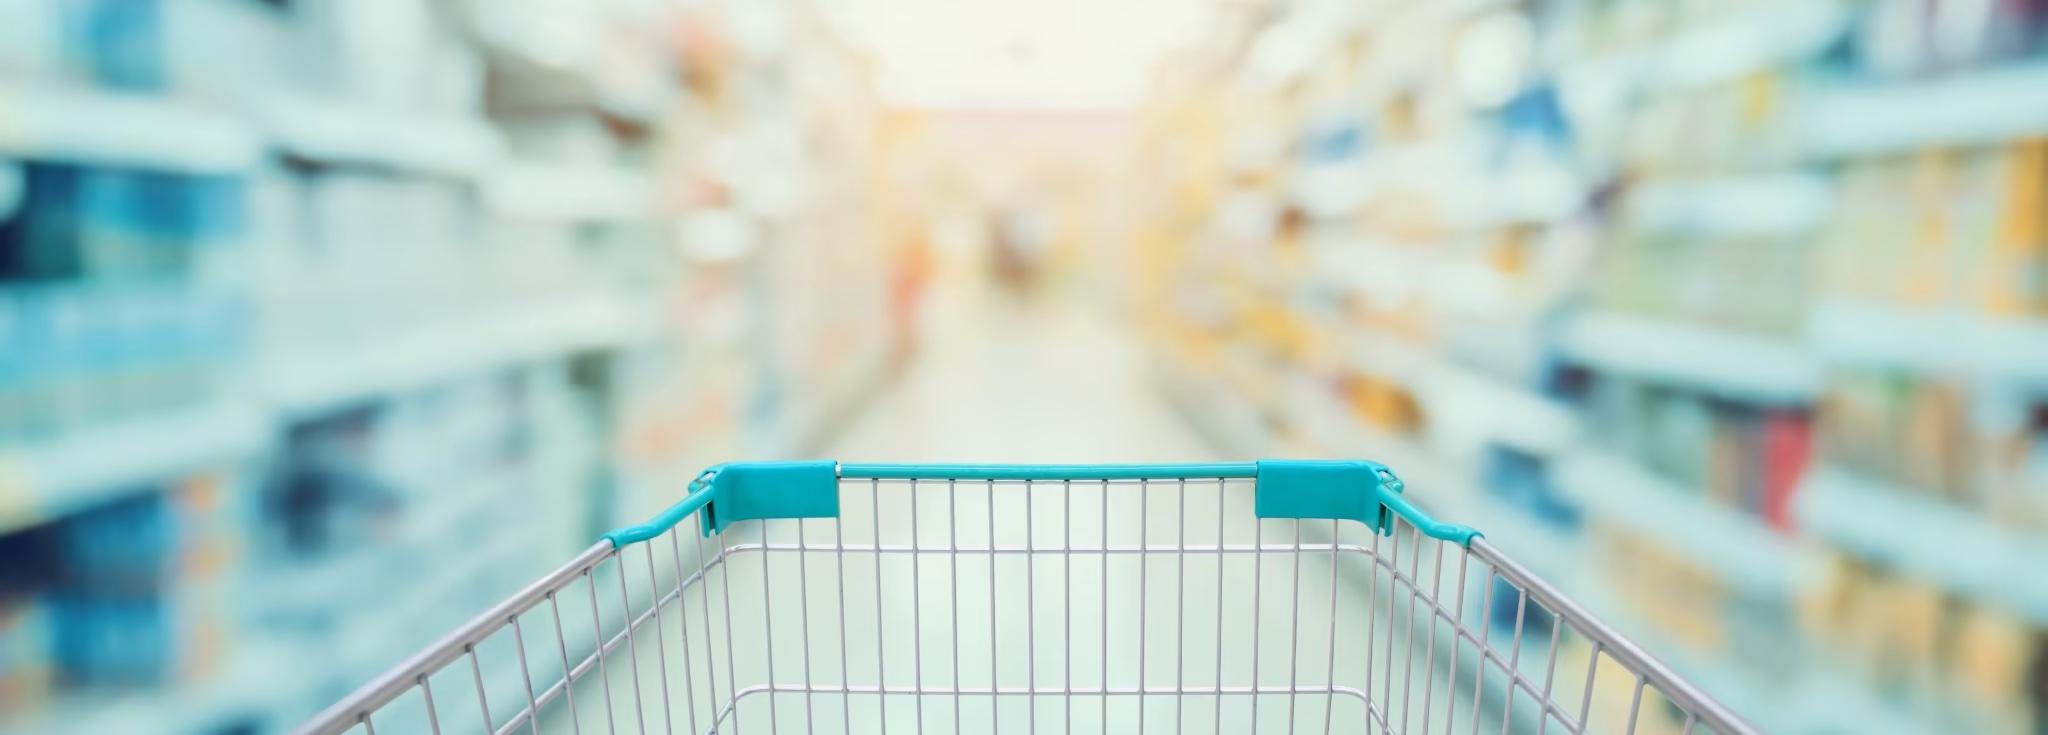 grocery retail store with blurred background and shopping cart.